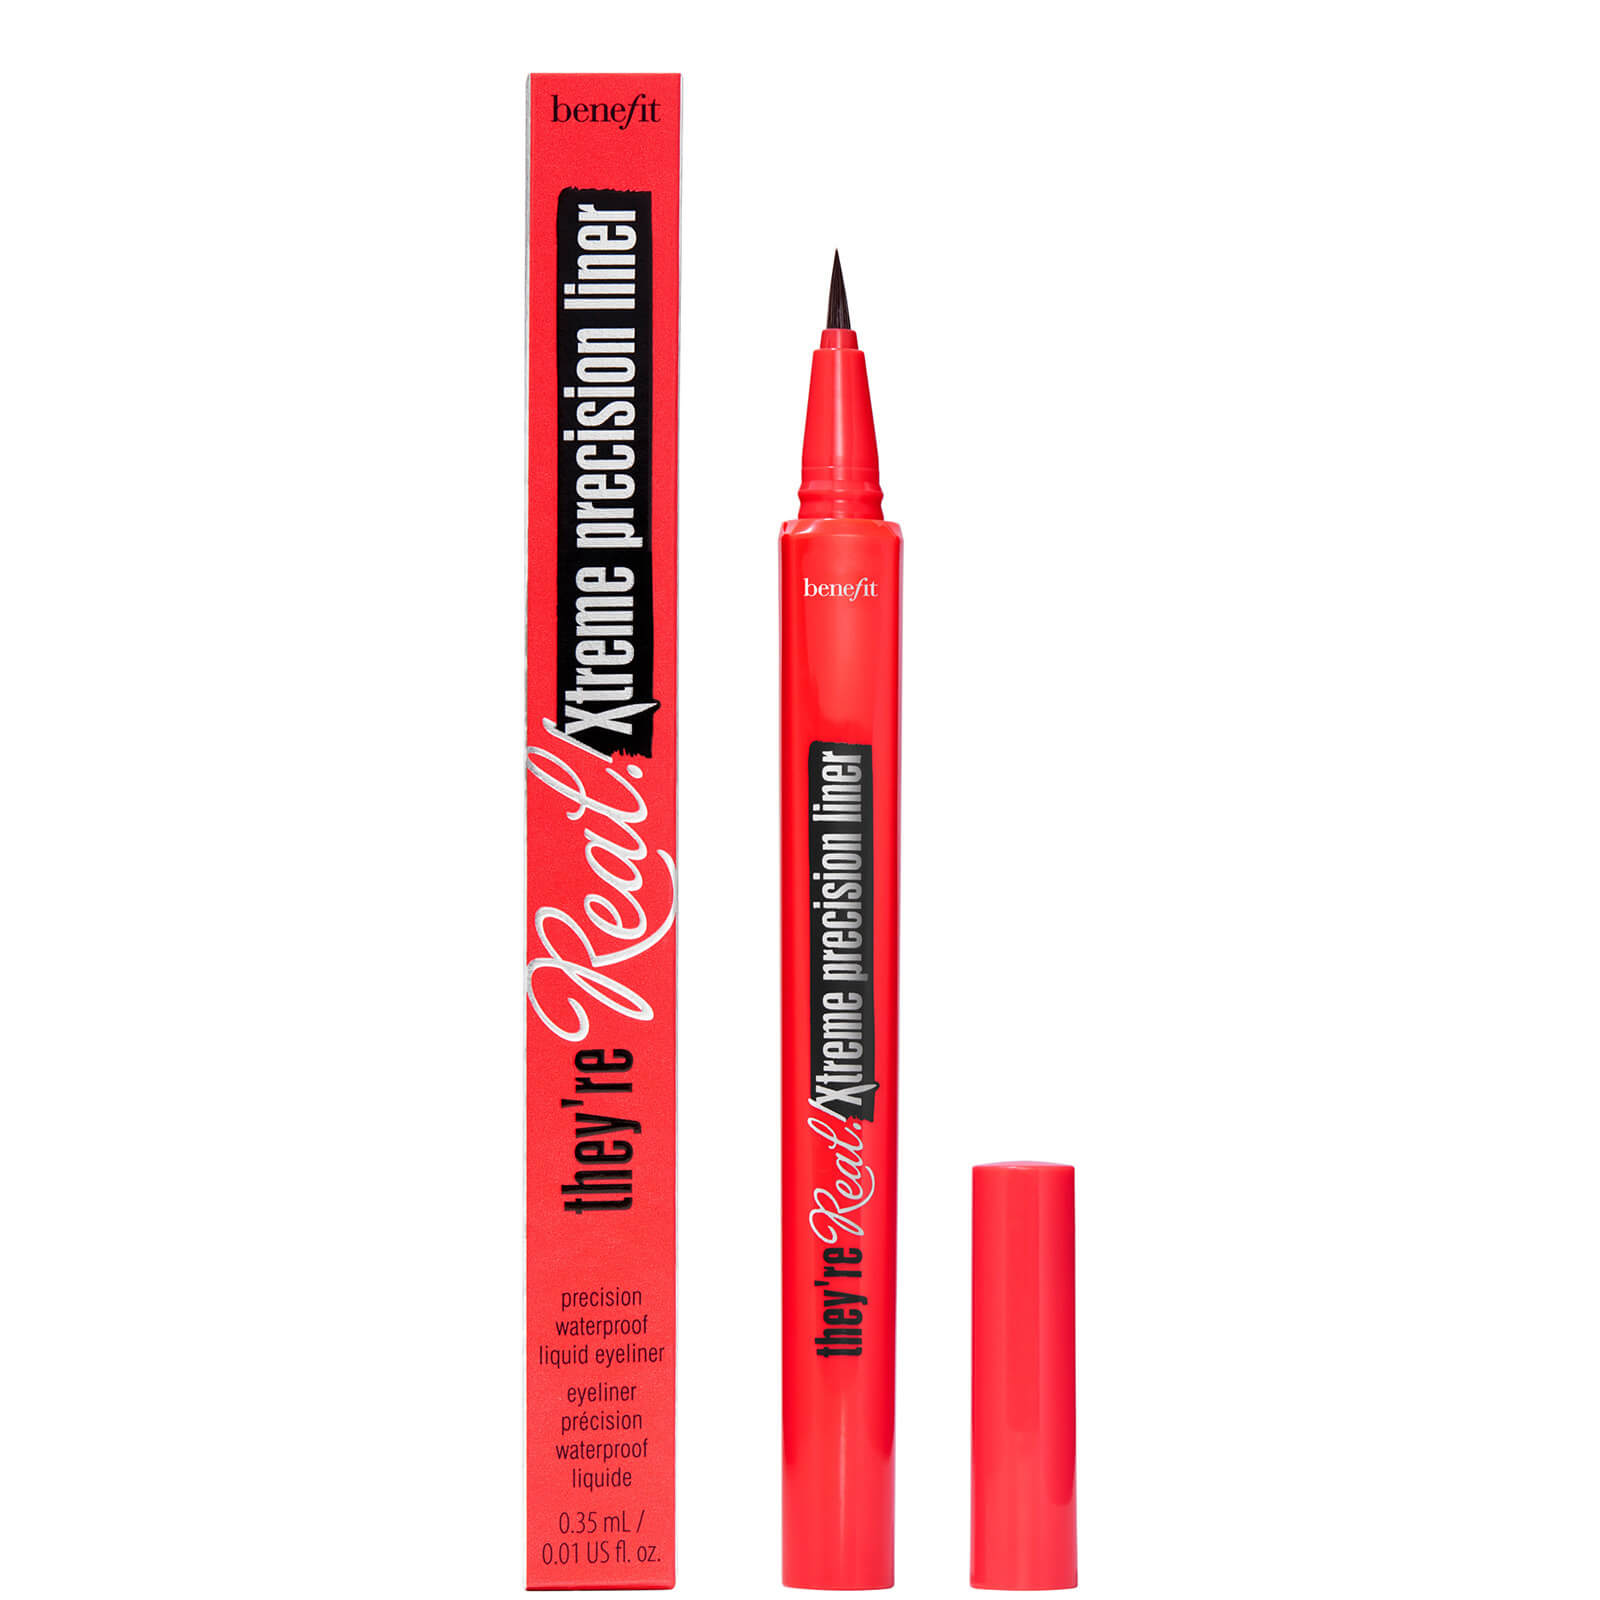 benefit They're Real Xtreme Precision Waterproof Liquid Eyeliner 0.35ml (Various Shades) - Xtra Blac